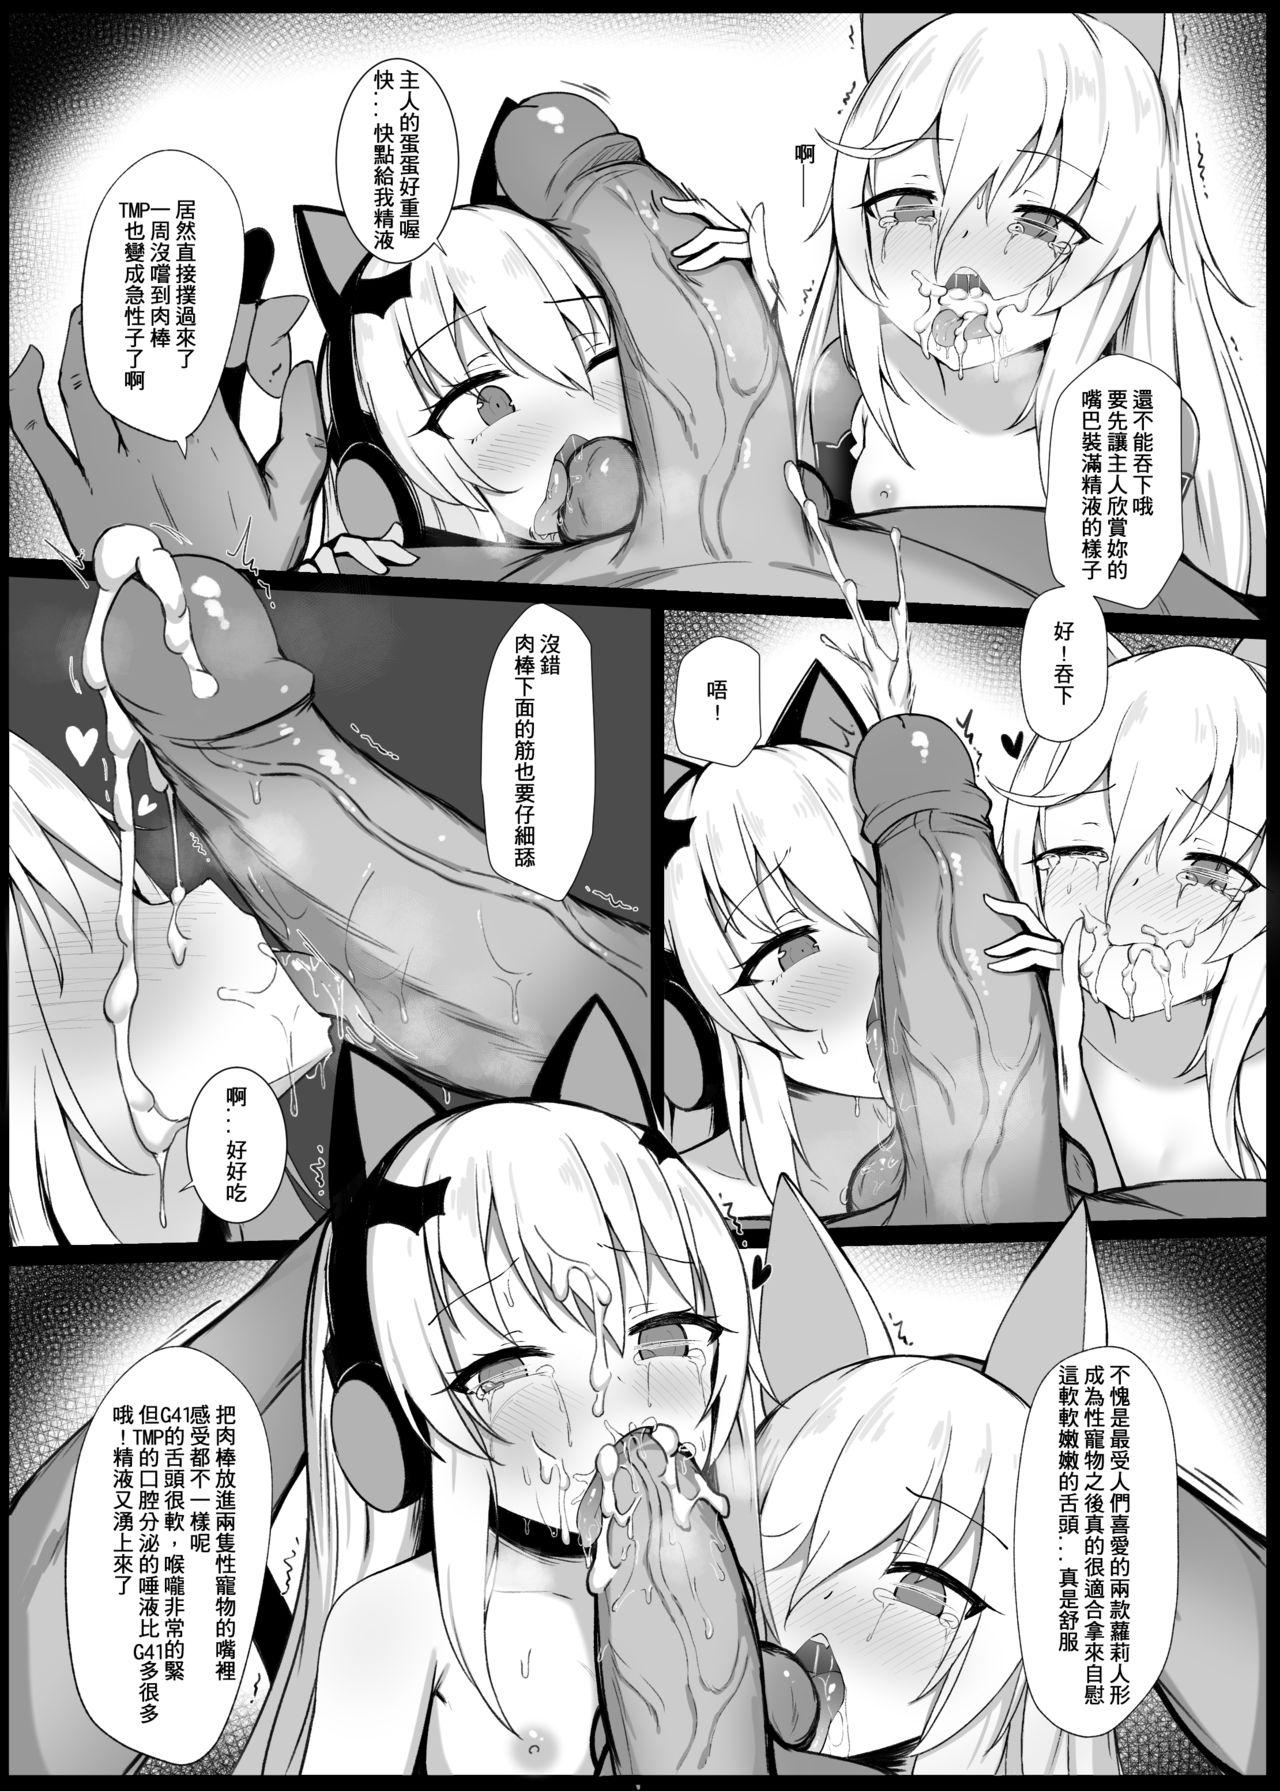 Blows Commander's Pet - Girls frontline Exhibition - Page 8